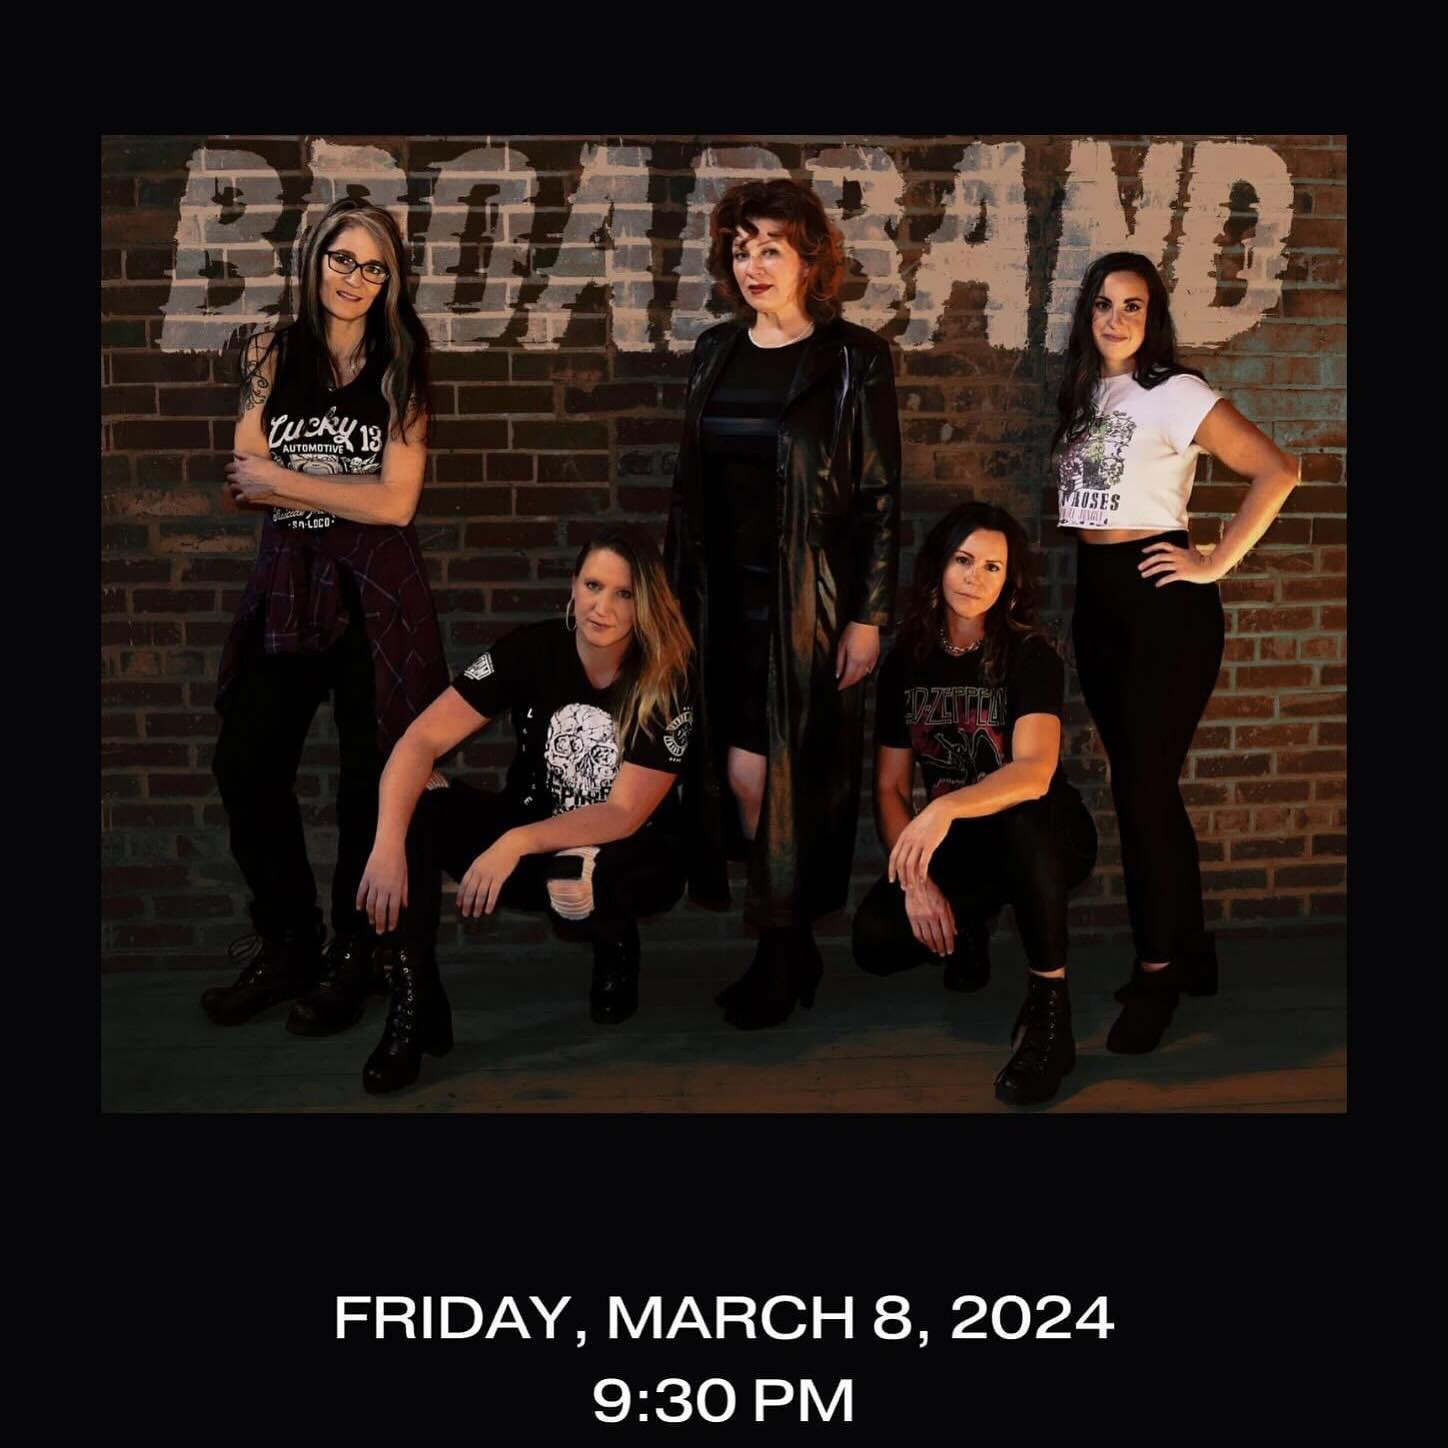 What better way to celebrate International Women&rsquo;s Day than rocking out with @_broadband !
These ladies will rock your socks off! 

Entry is FREE! 
Doors open at 9:00pm 

___________________

#ralphsmedicinehat #ralphsmh #ralphs #livemusic #IWD